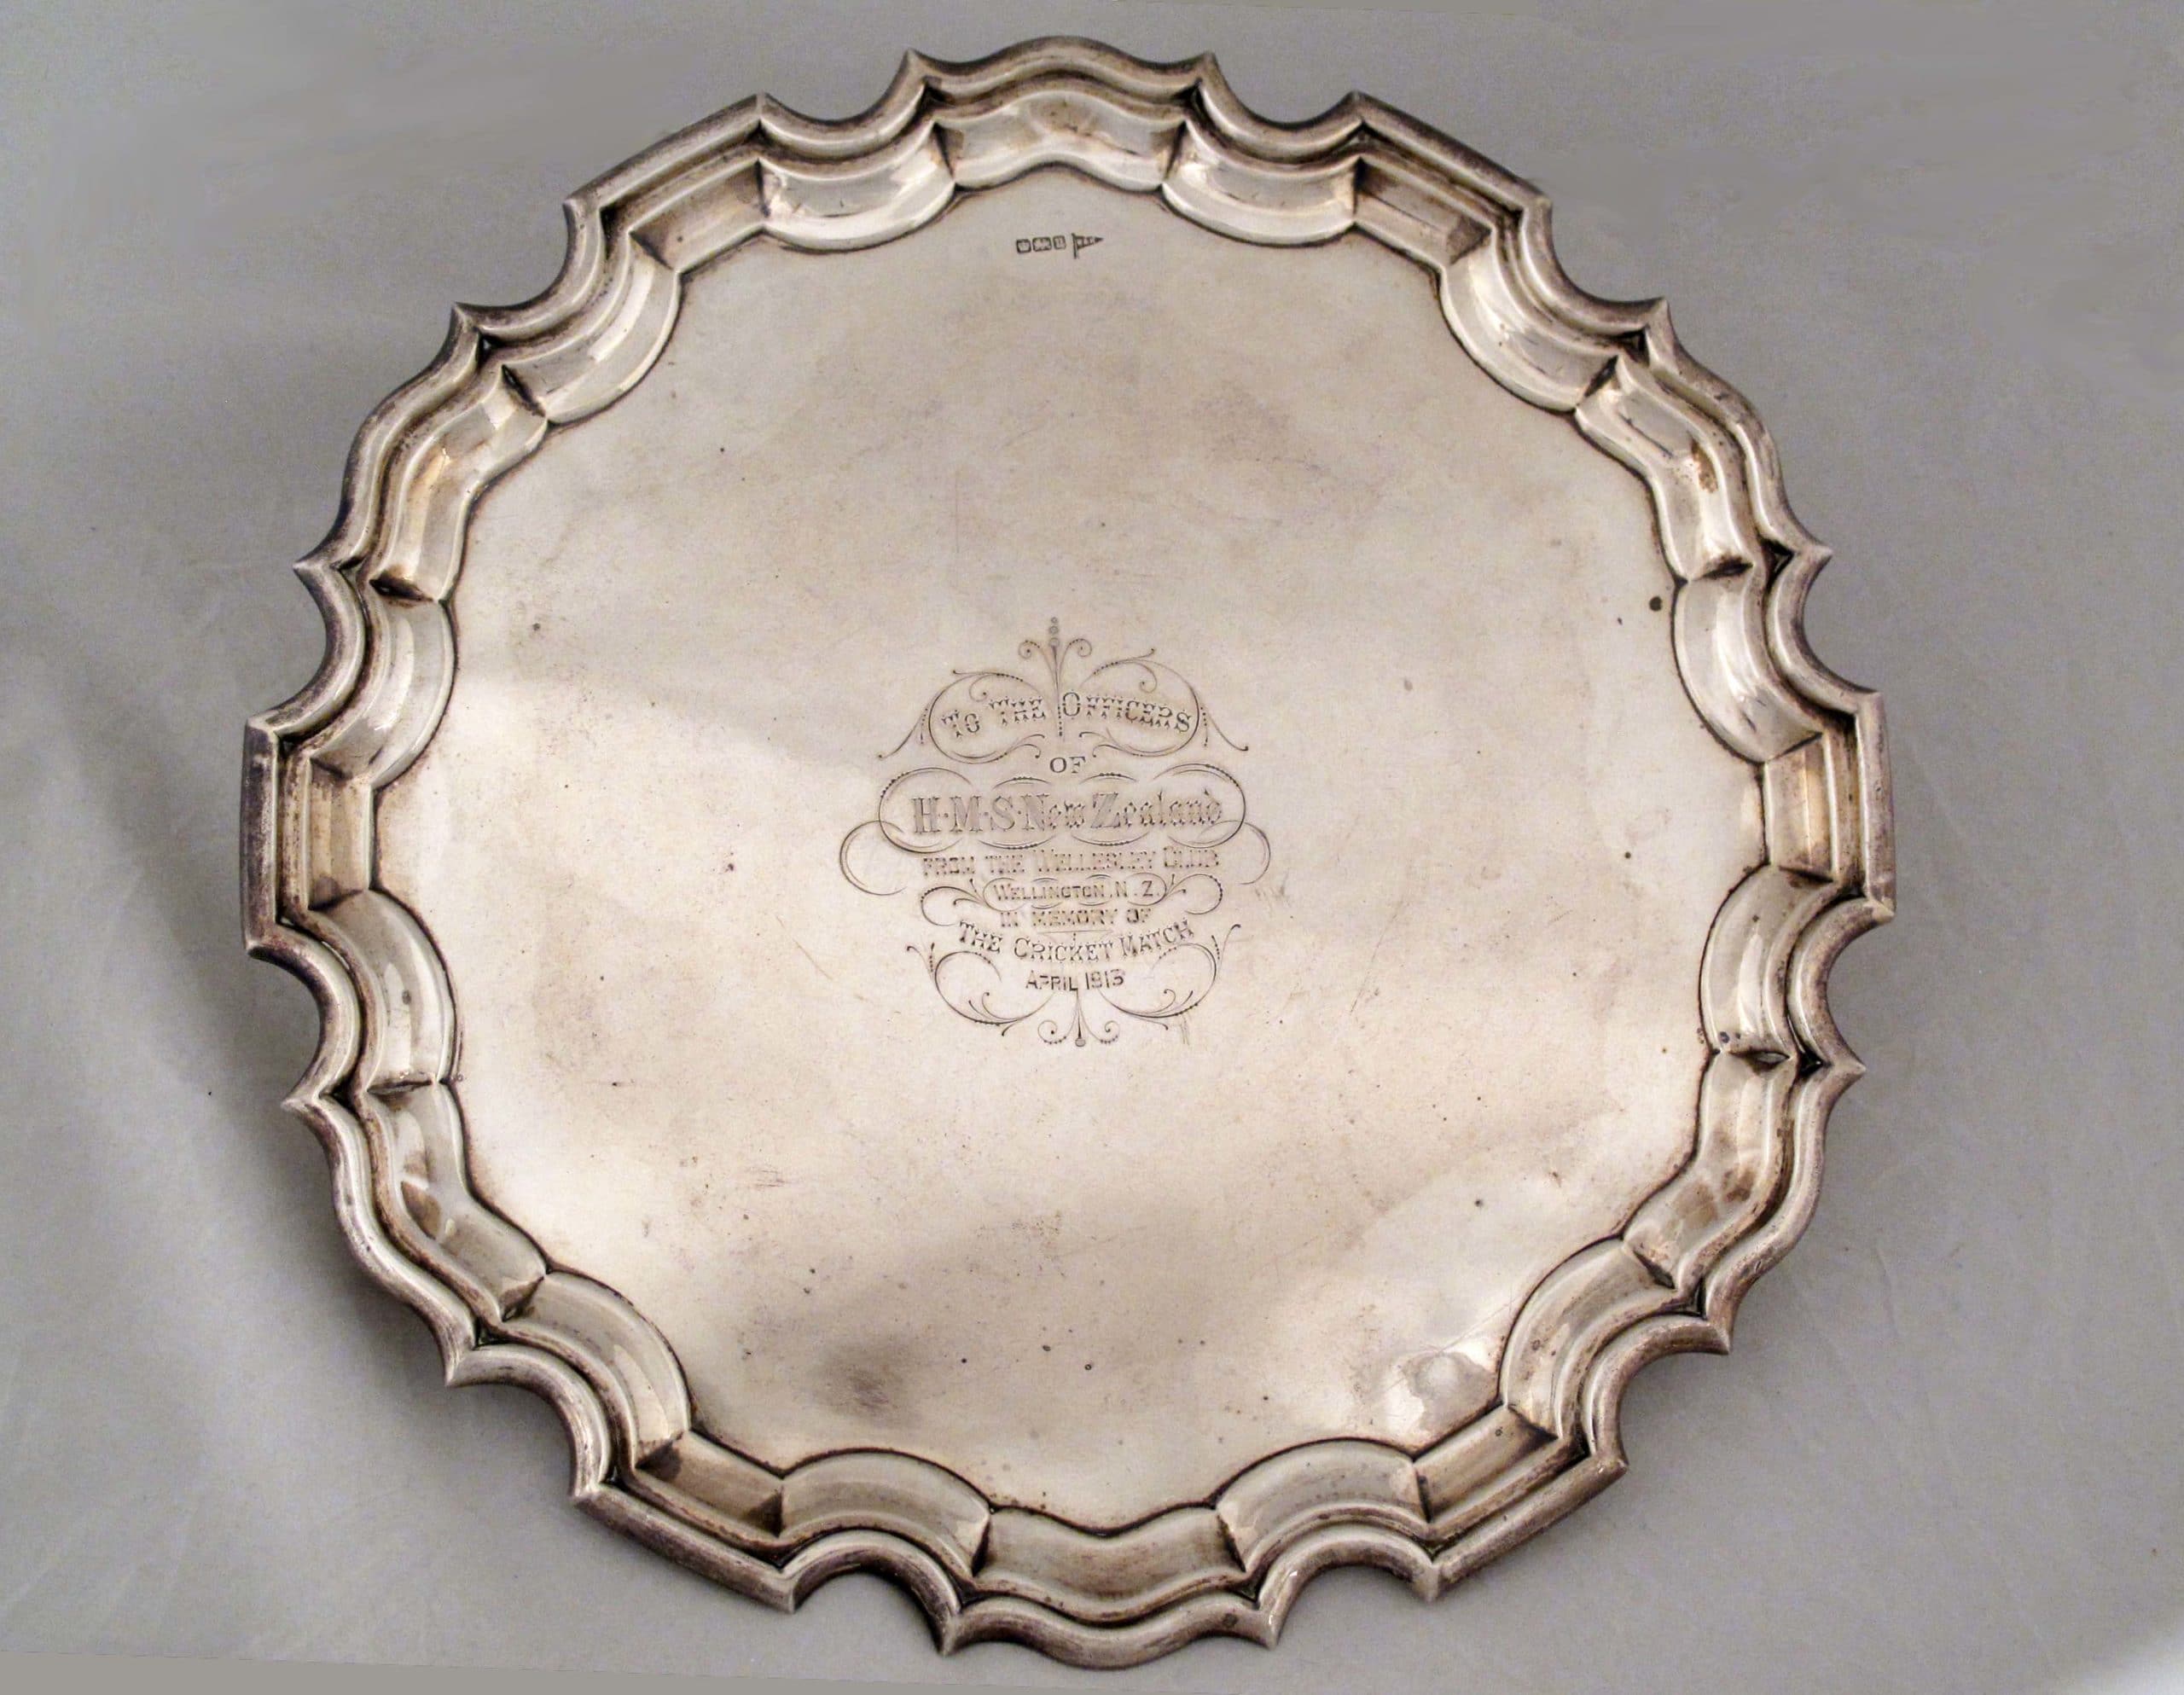 Silver salver with scalloped and turned up edges presented to HMS New Zealand.